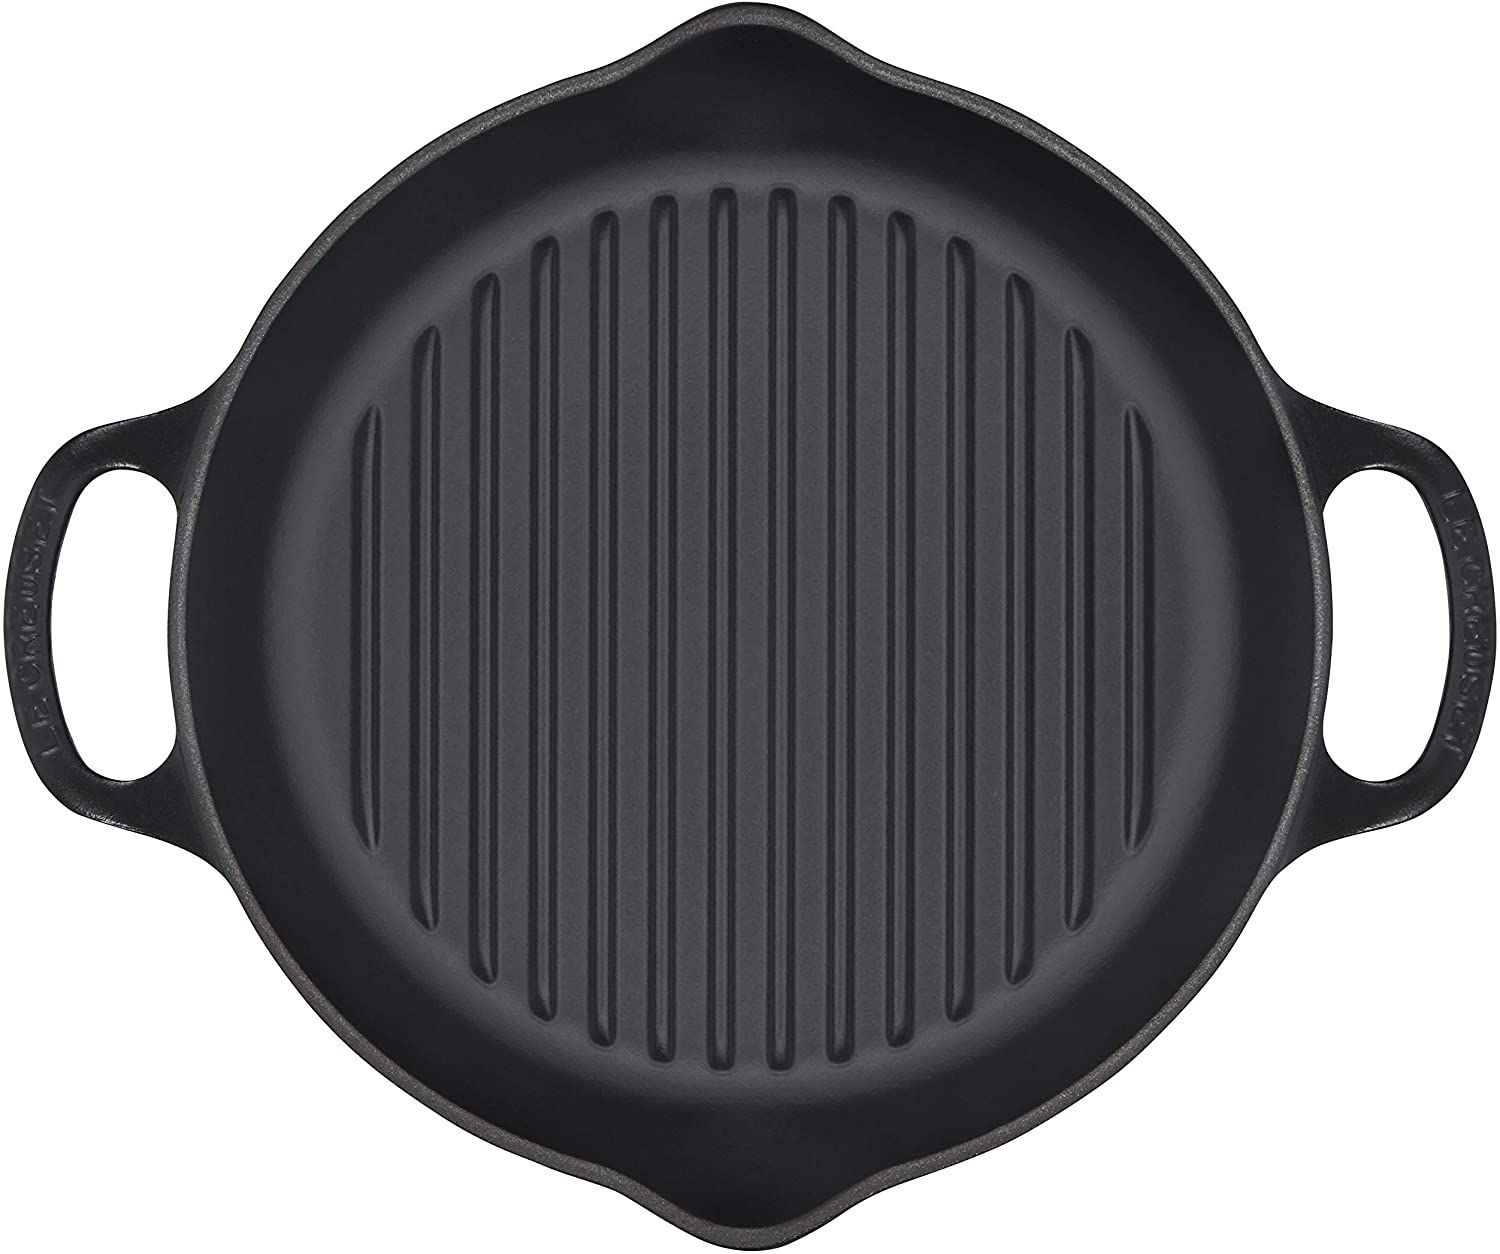 Le Creuset Enameled Cast Iron Signature Deep Round Grill, 9.75"